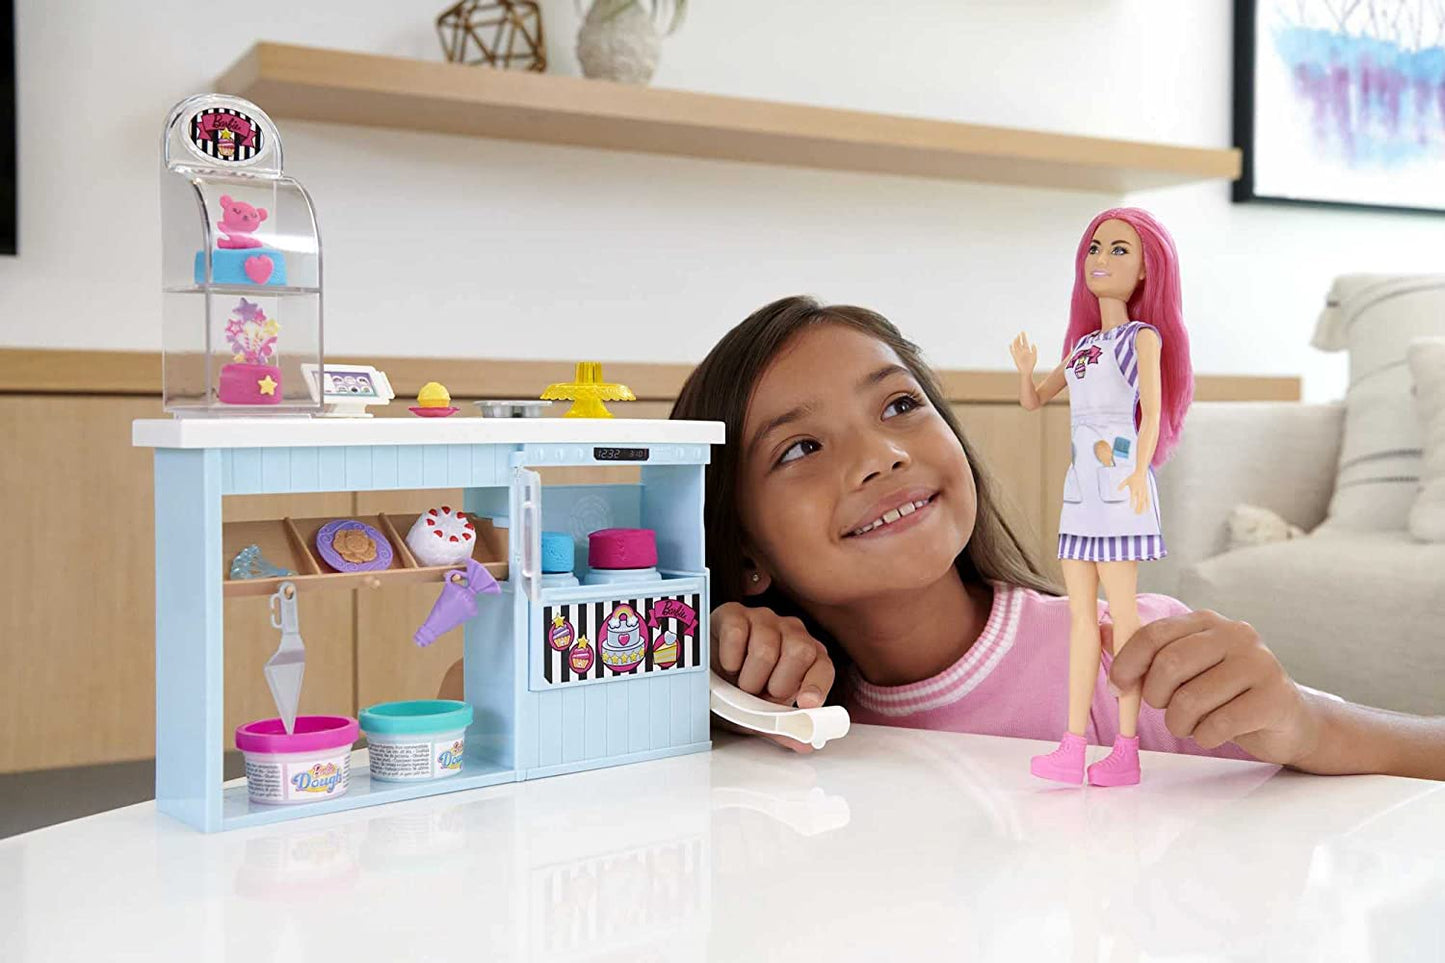 Barbie Doll and Accessories, Bakery Playset with Pink-Haired Petite Doll, Baking Station, Cake-Making Feature and 20+ Play Pieces